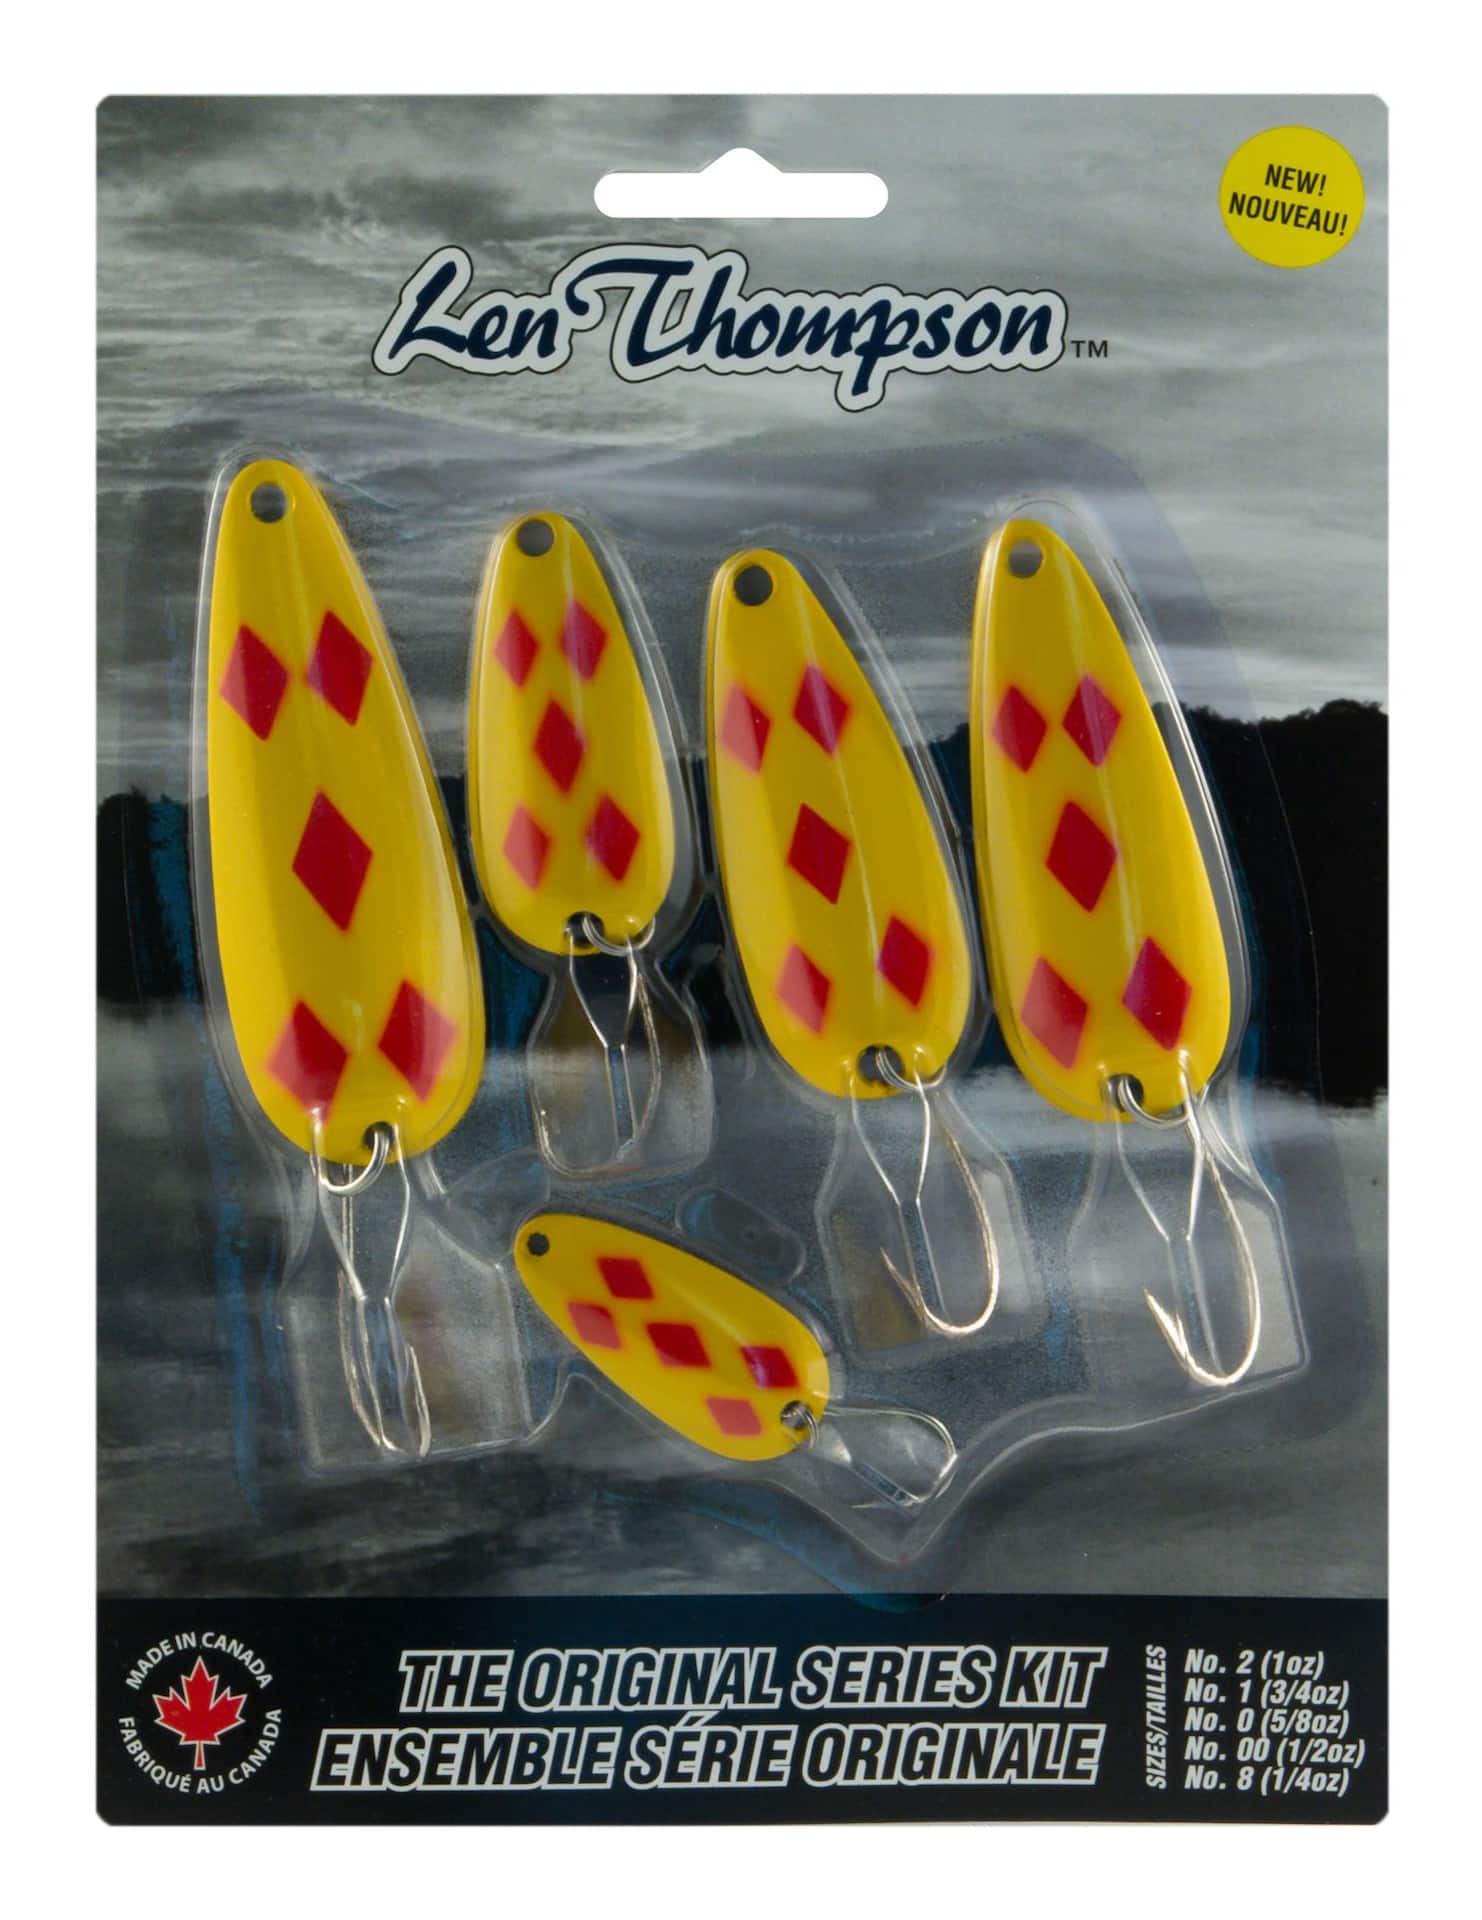 https://media-www.canadiantire.ca/product/playing/fishing/fishing-lures/1783639/len-thompson-5-of-diamonds-spoon-kit-siwash-5-piece-2616ce91-ce5e-4470-bbdc-05f5606ca6e0-jpgrendition.jpg